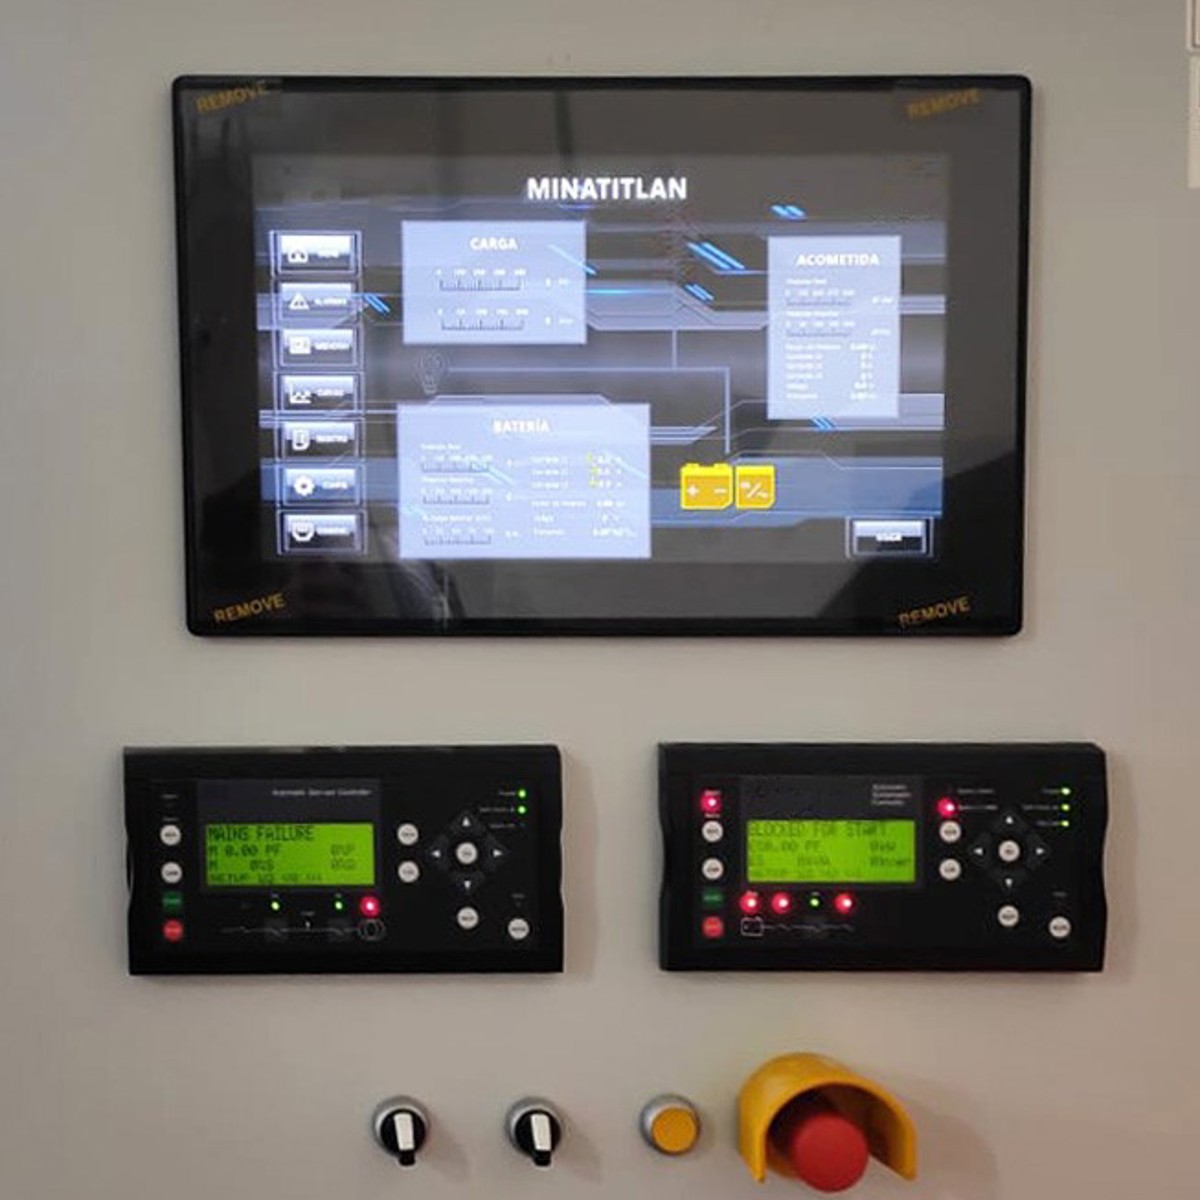 Skysense® operates the BESS systems using its proprietary Skycontrol energy management system which uses DEIF AGC-4 Mk II and ASC-4 Battery controllers